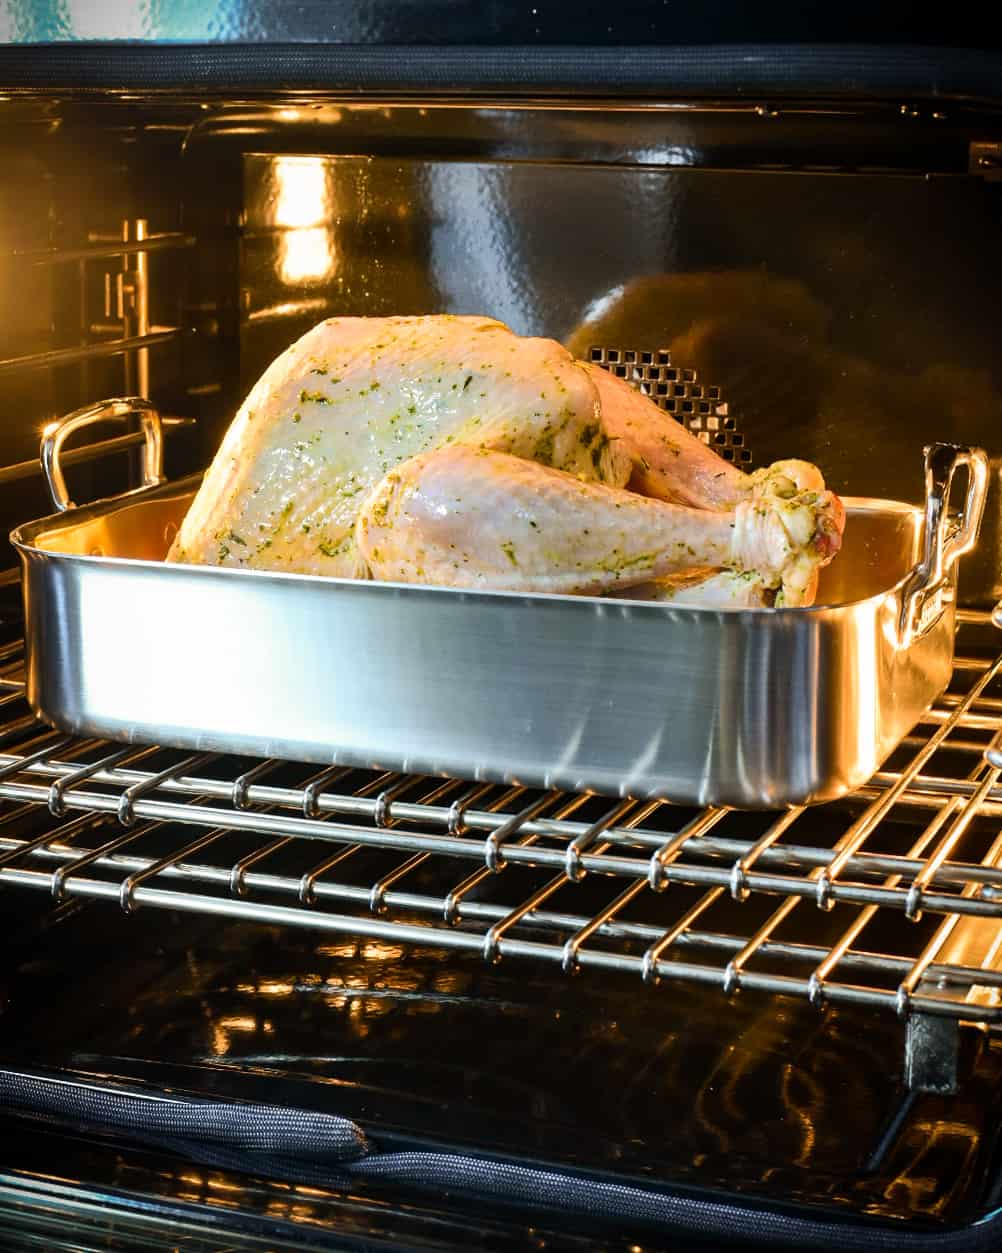 Roasted Turkey in a roaster, in the oven.